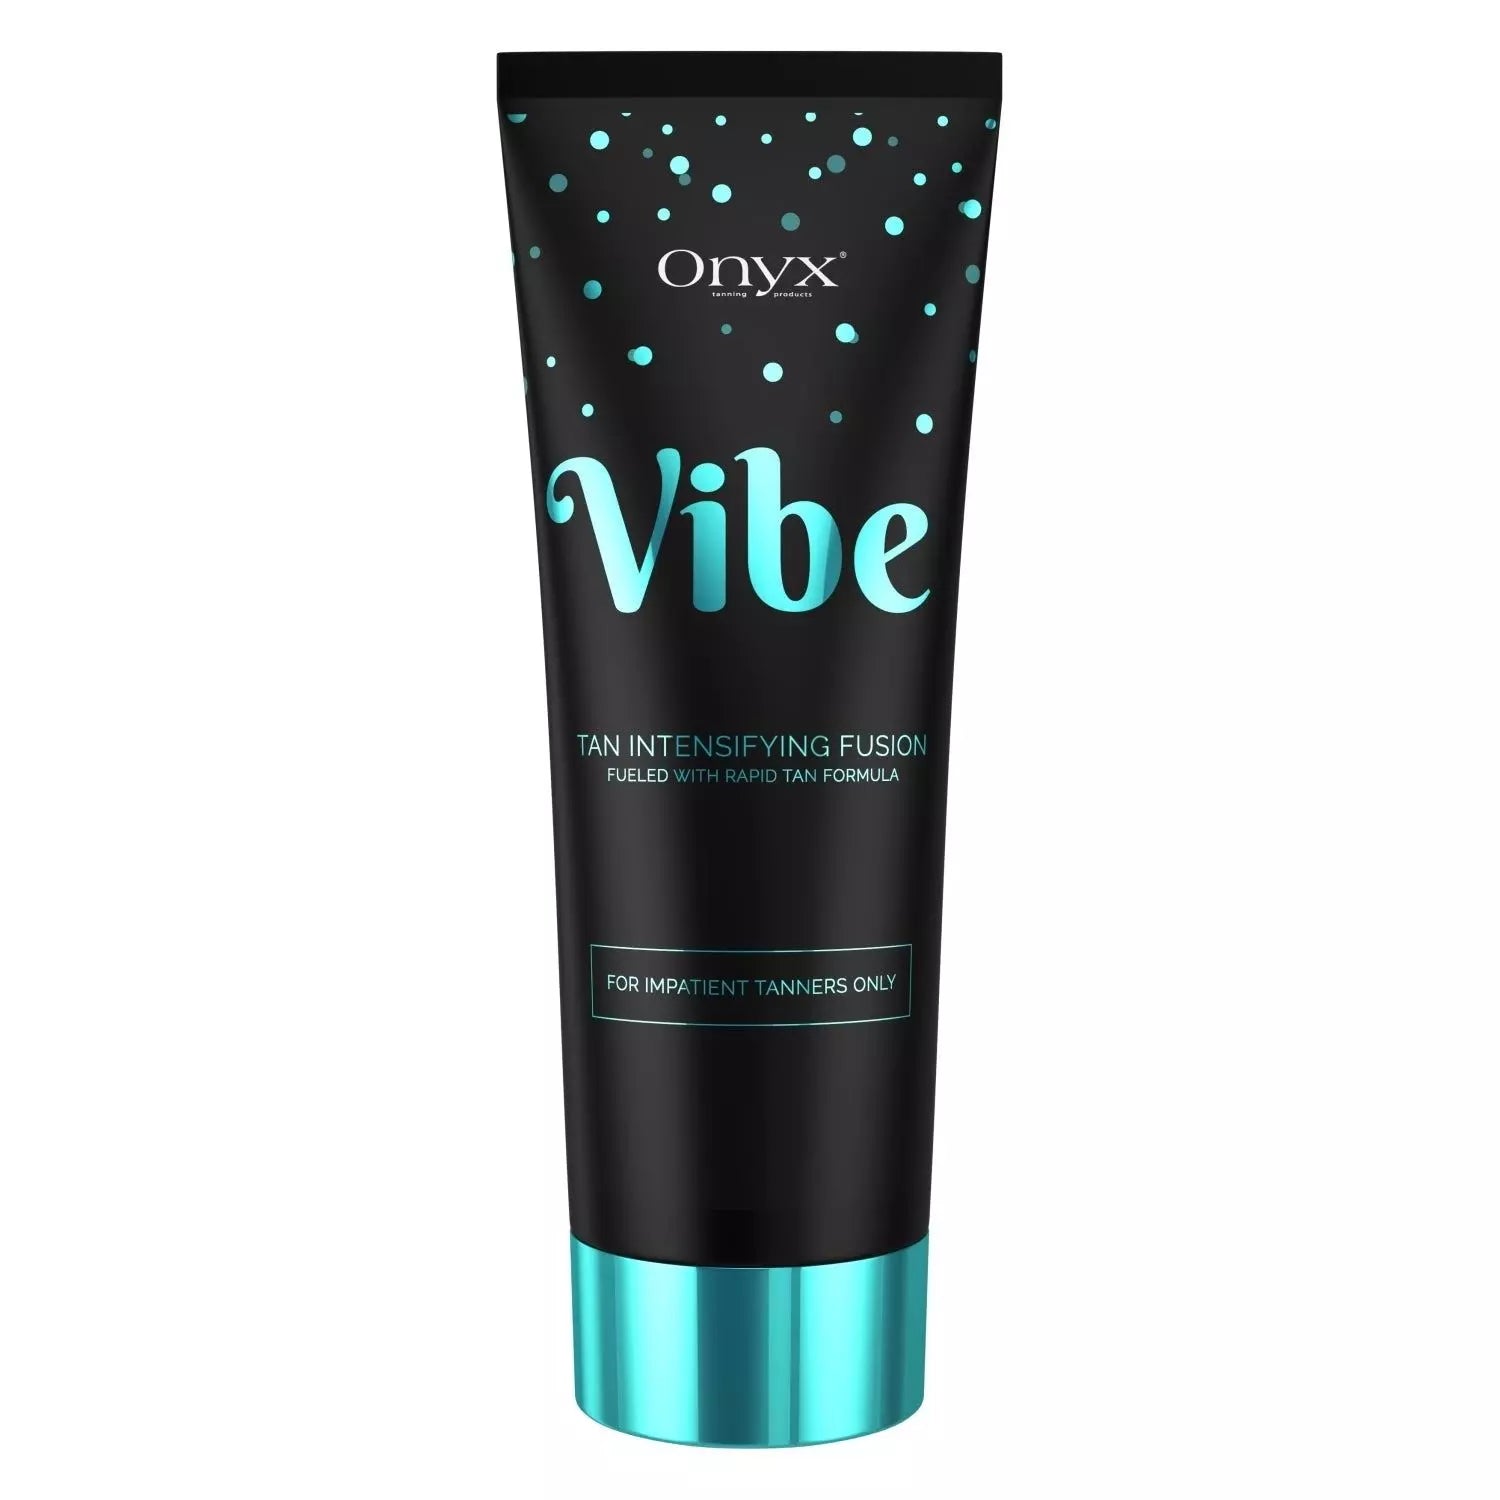 Vibe indoor tanning accelerator